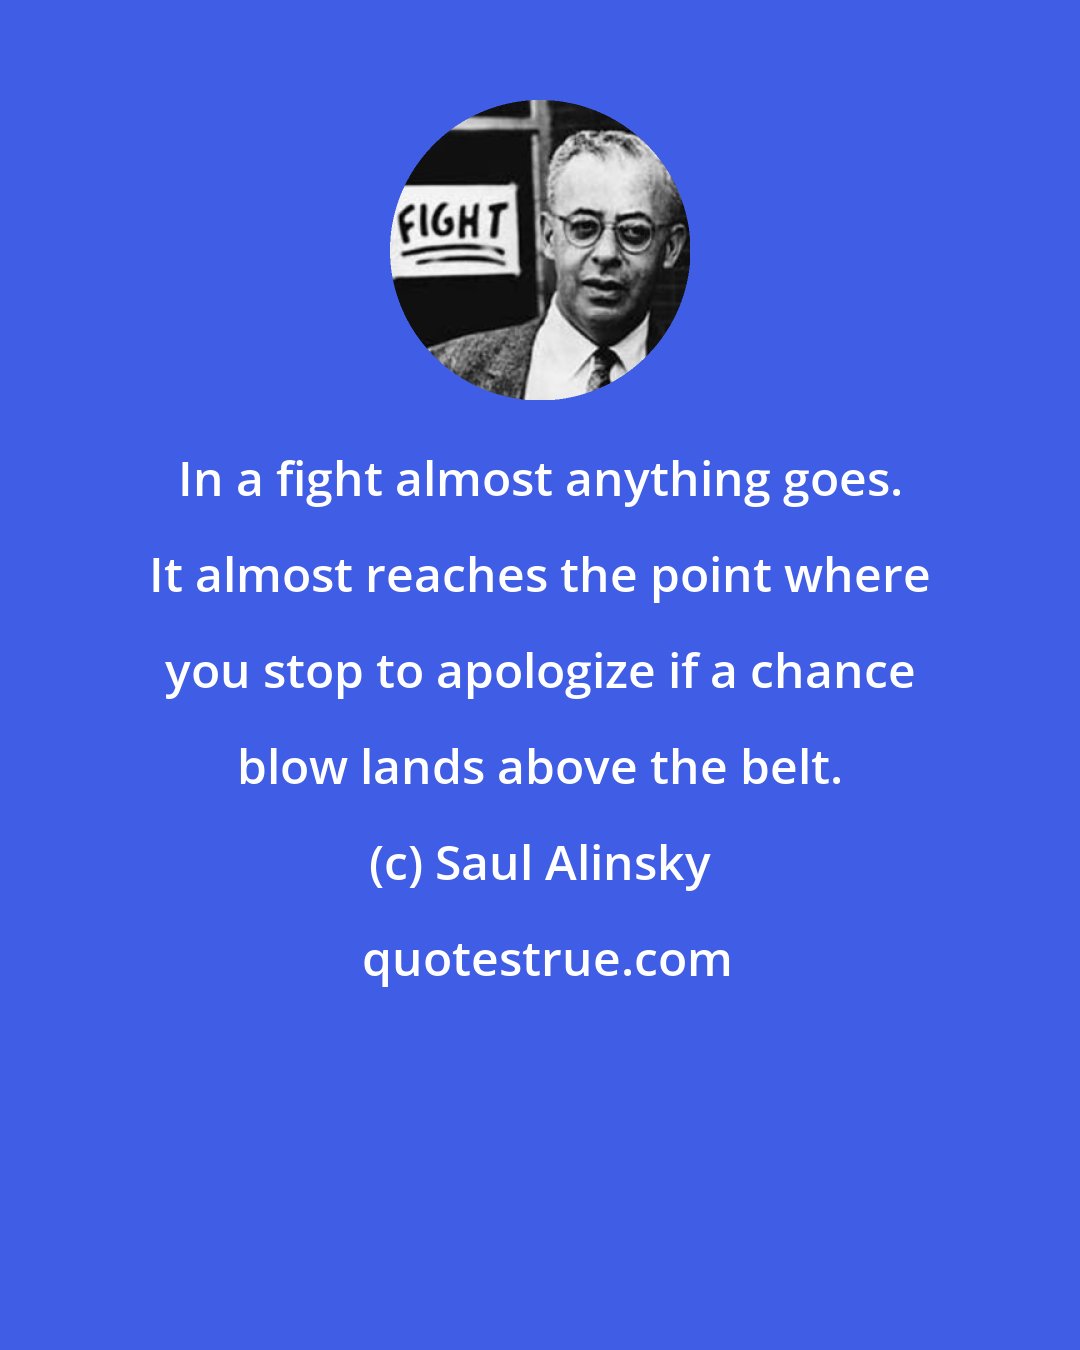 Saul Alinsky: In a fight almost anything goes. It almost reaches the point where you stop to apologize if a chance blow lands above the belt.